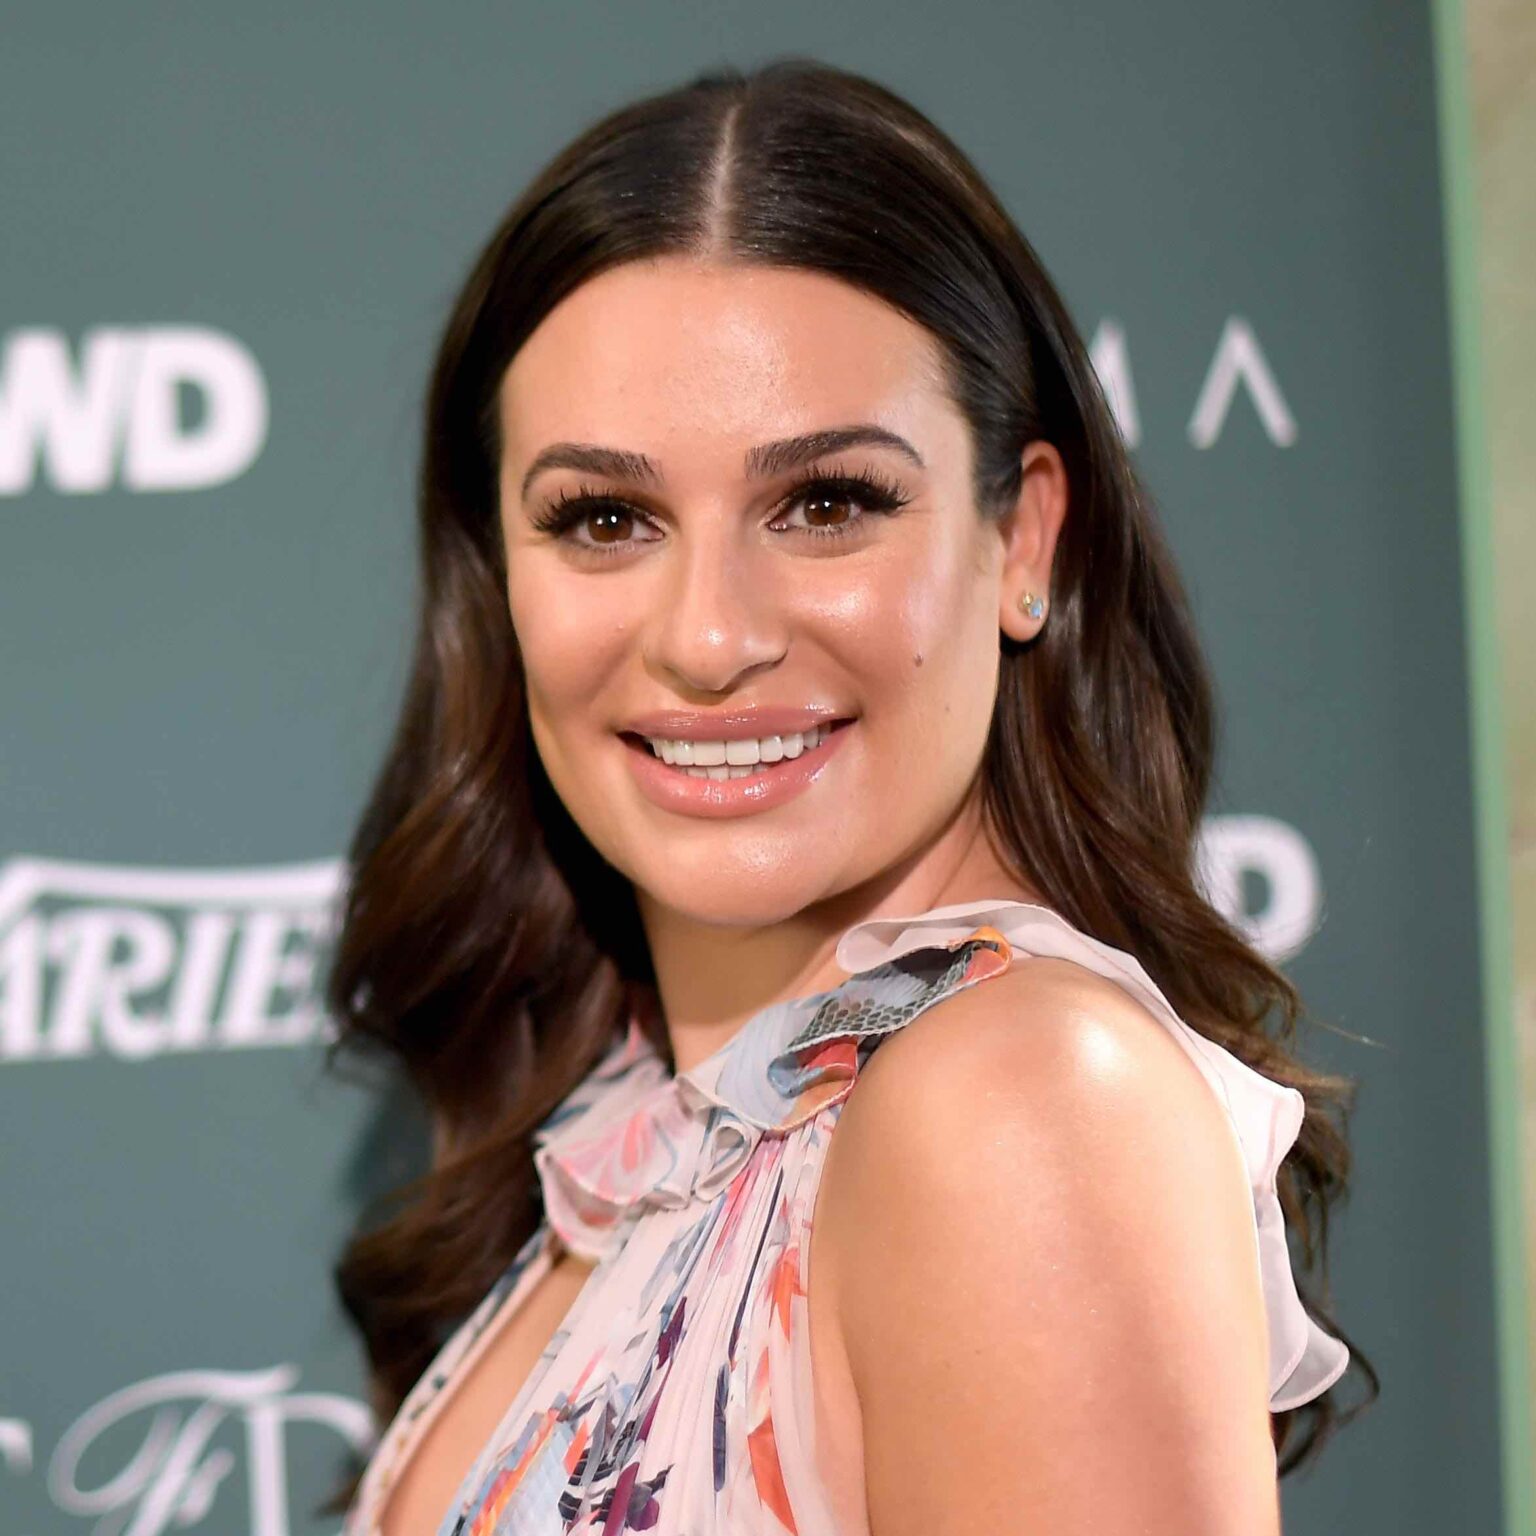 Lea Michele may have played a diva on 'Glee', but recent allegations are proving she's racist and cruel to anyone that isn't her.